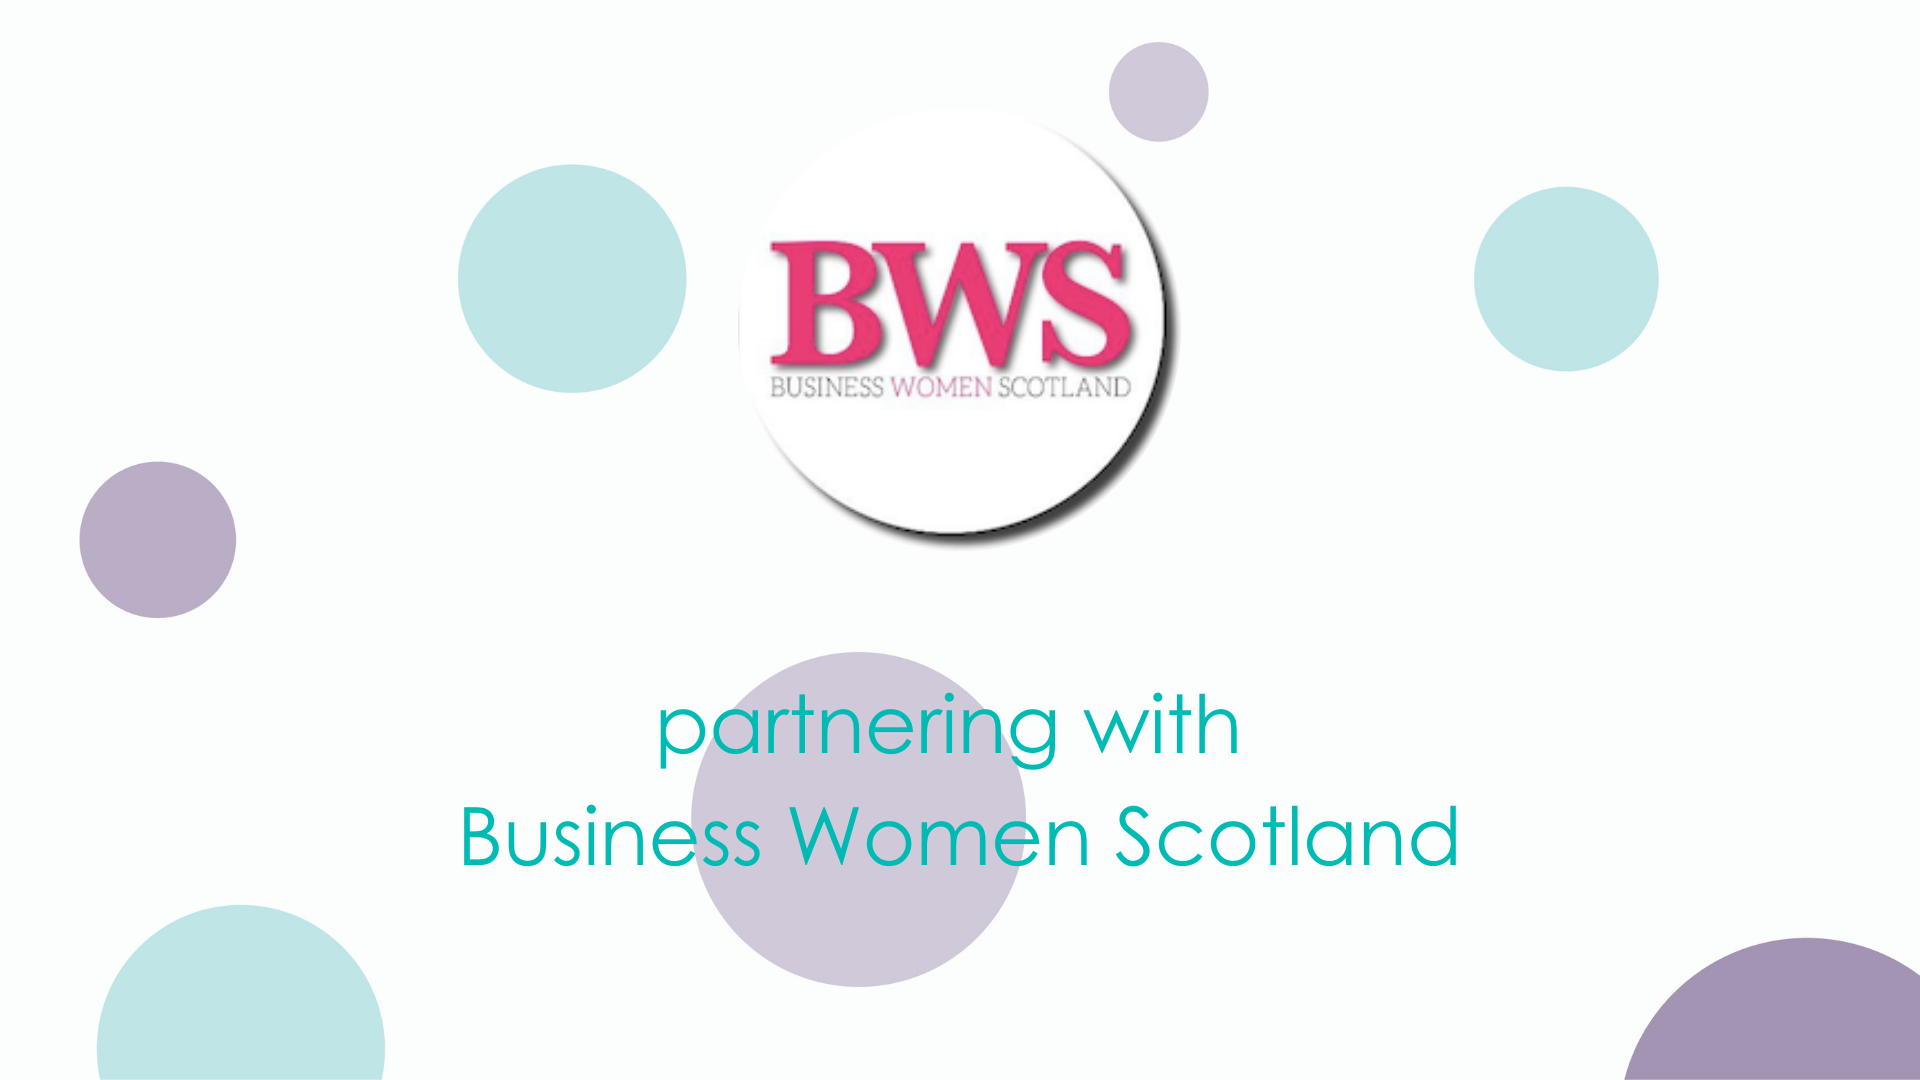 ammu is proud to partner with BWS